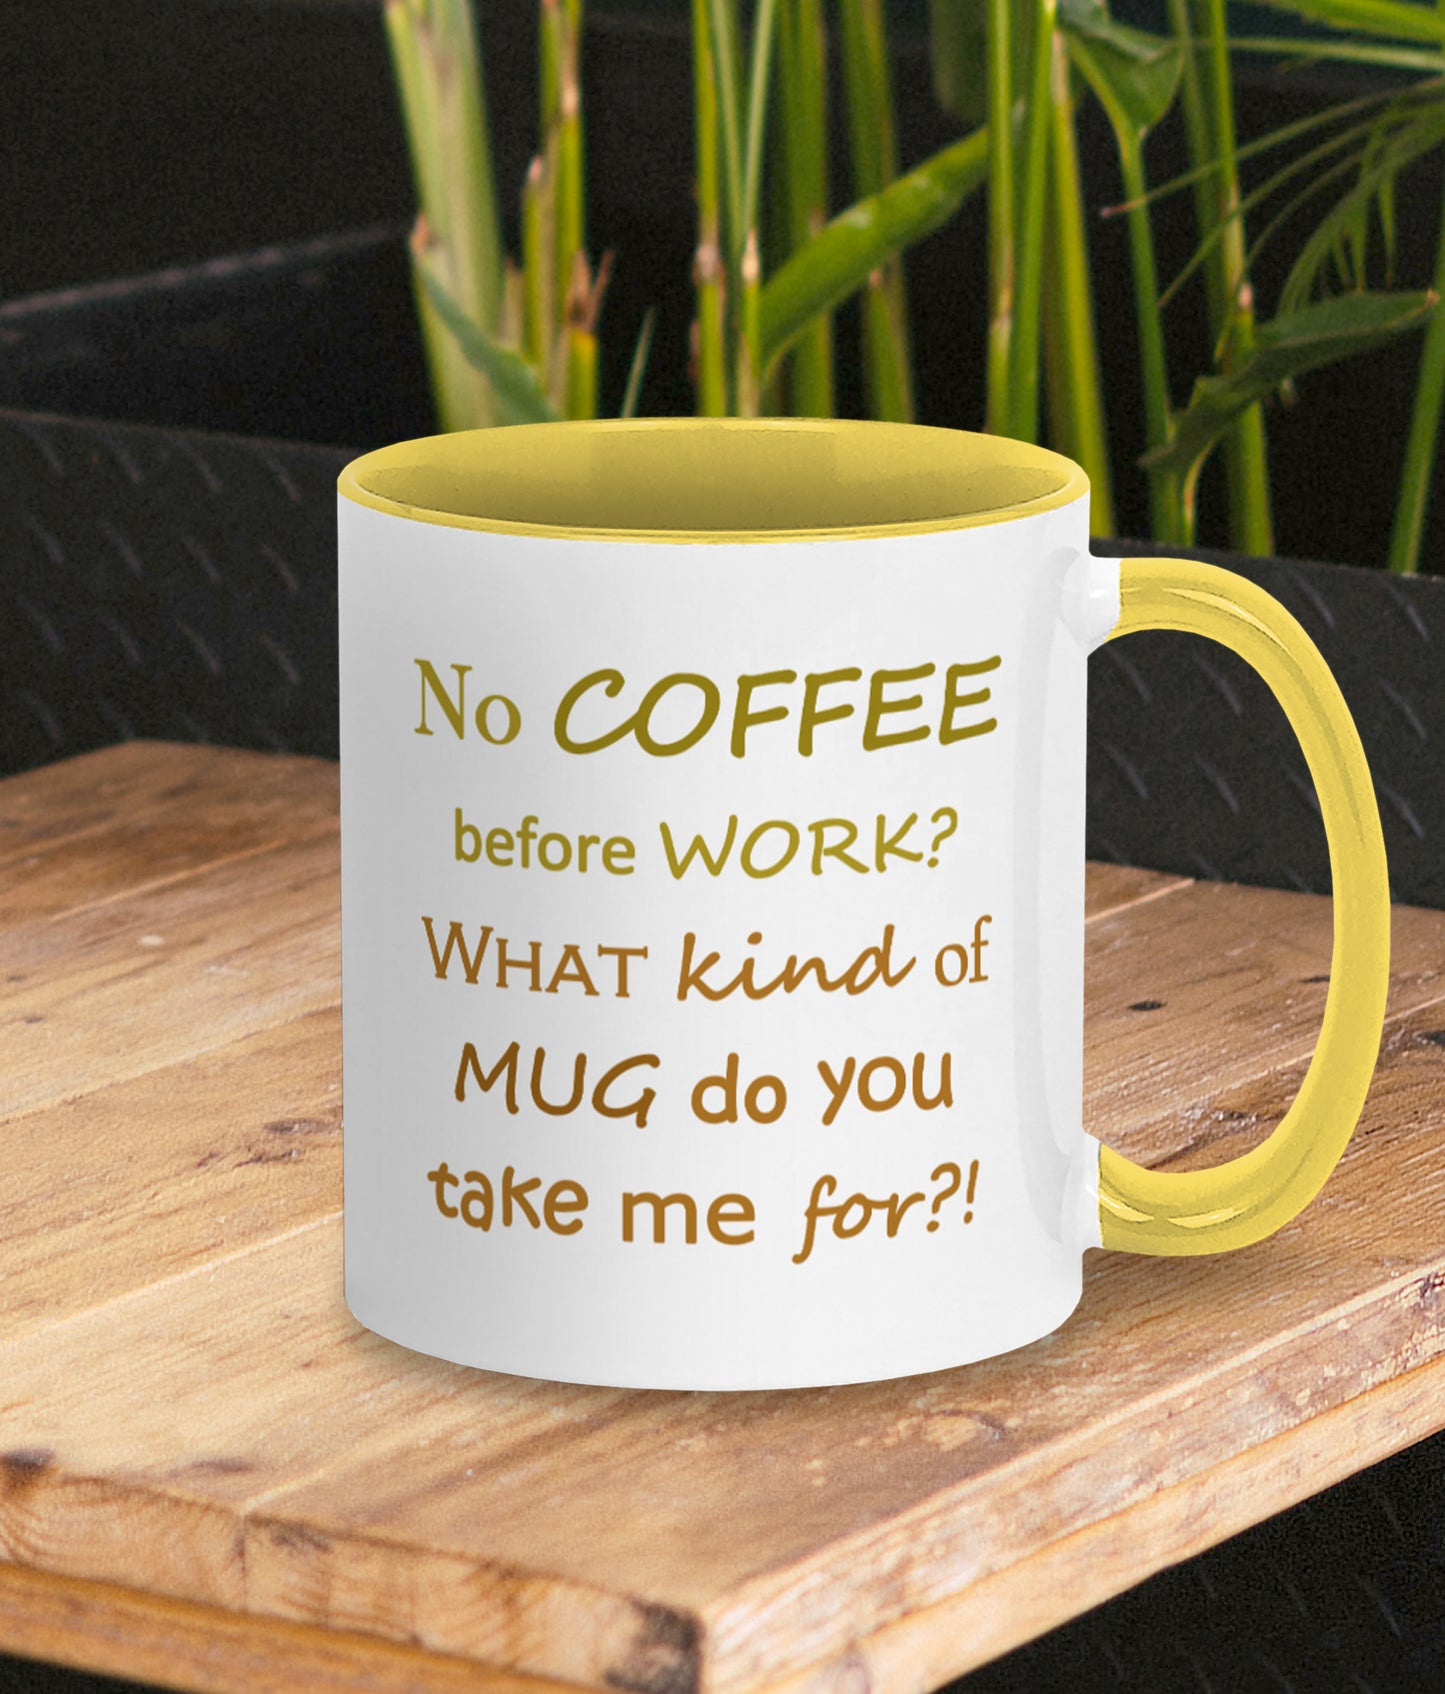 Funny mug about work. Gift for coffee lover and work bestie. White mug with yellow inner and handle. Two tone yellow/brown text on mug reads humorous words No COFFEE before WORK? WHAT kind of MUG do you take me for?!